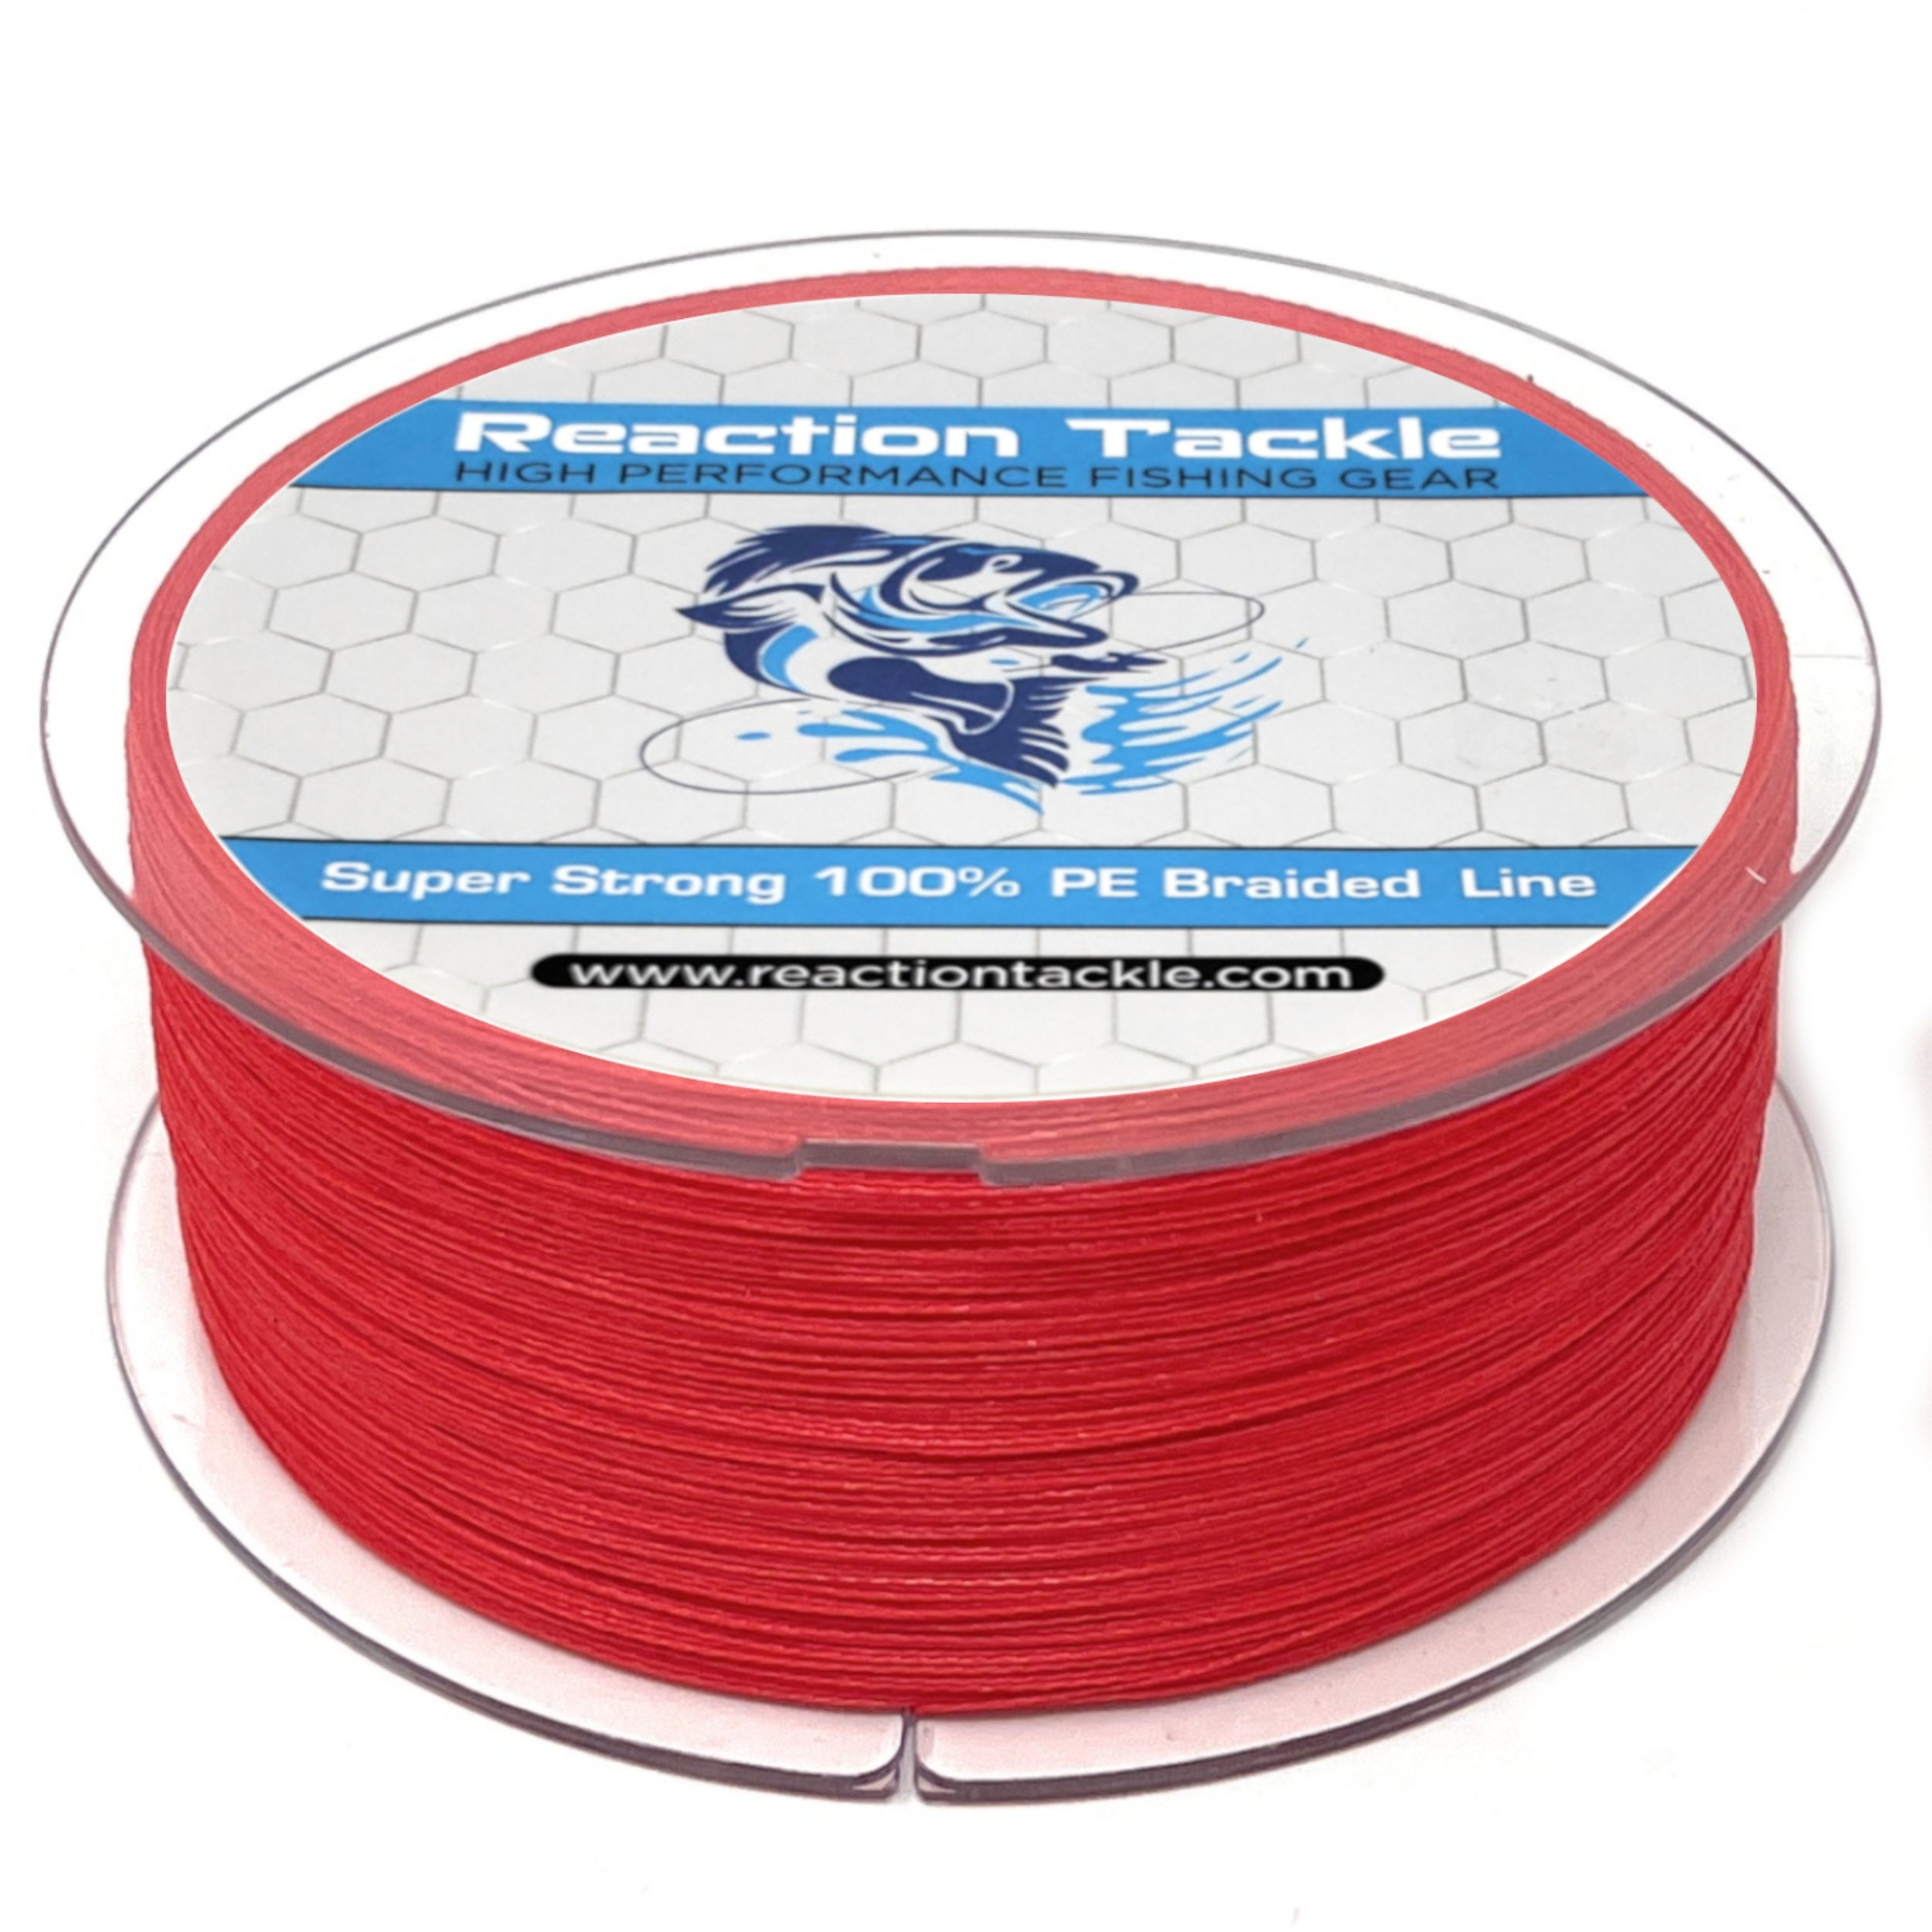 AKvto Red SILKY4 Braided Fishing LINE - Ultra-Thin Diameter, Smooth Surface  So It Casts Longer, Highly Sensitive, No Stretch Braided Fishing Line,  Abrasion Resistant